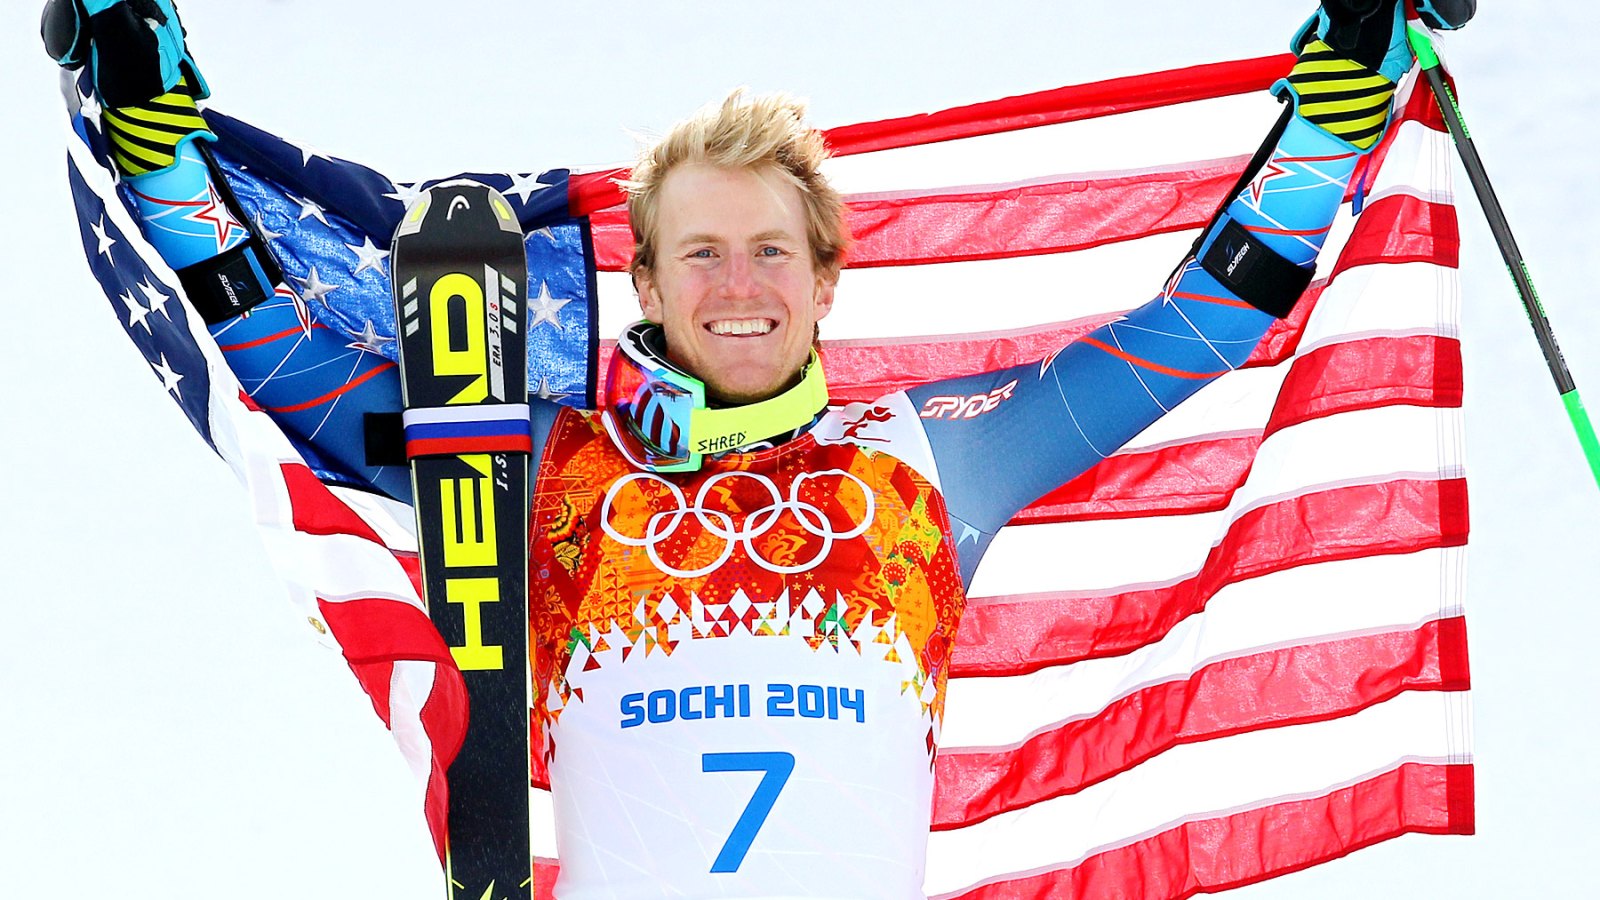 Ted Ligety Wins Gold in Men's Giant Slalom at Olympics: 